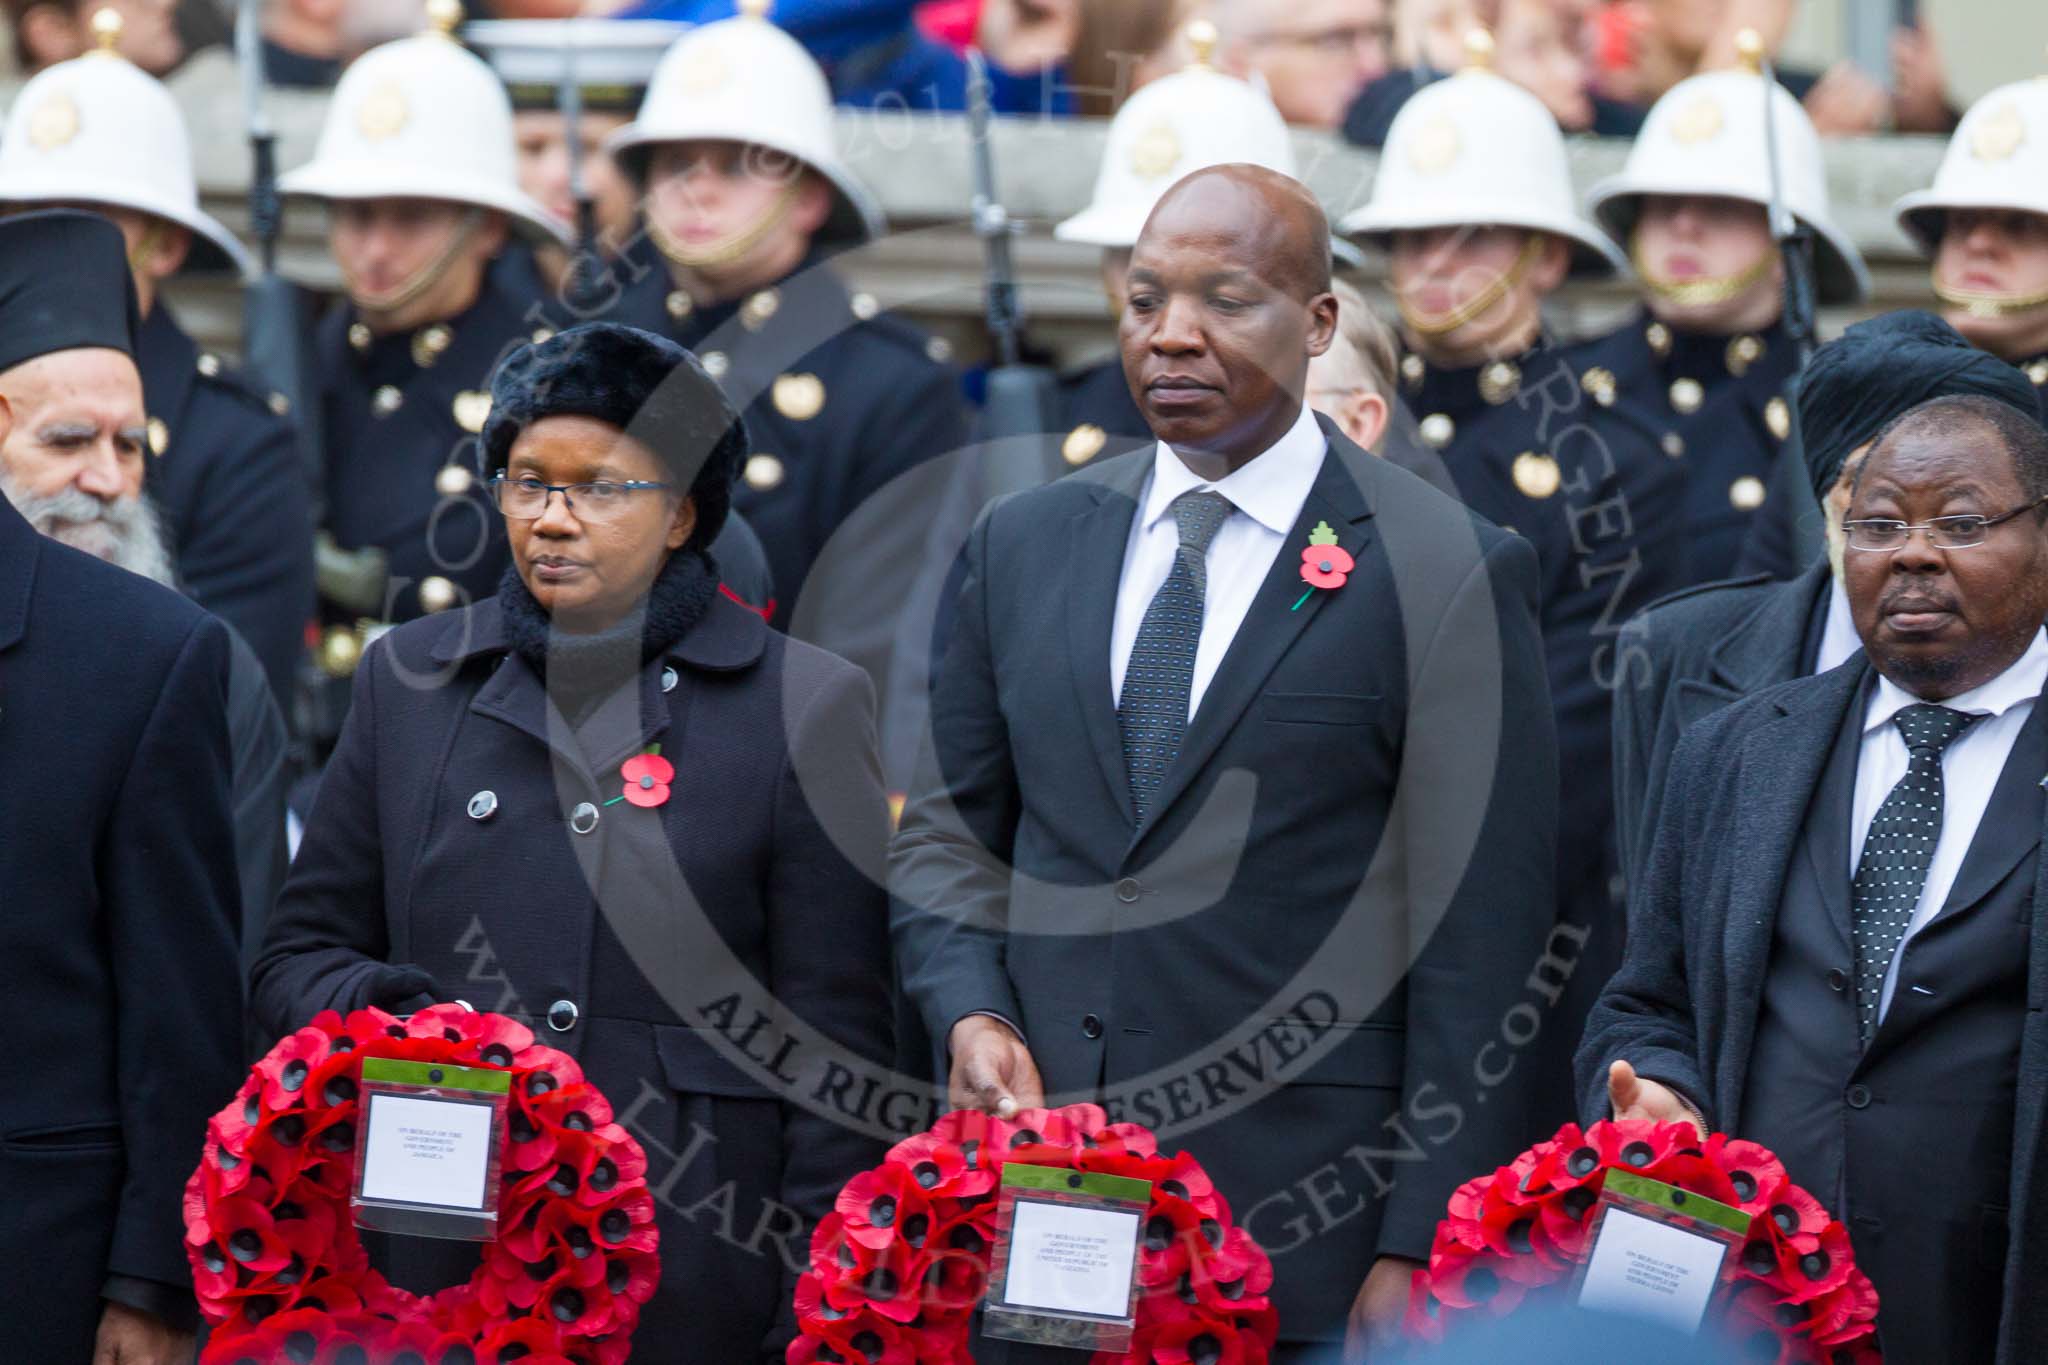 Remembrance Sunday at the Cenotaph 2015: The Minister Counsellor of Jamaica, the High Commissioner of Tanzania, and the Deputy High Commissioner of Sierra Leone with their wreaths at the Cenotaph. Image #111, 08 November 2015 10:57 Whitehall, London, UK